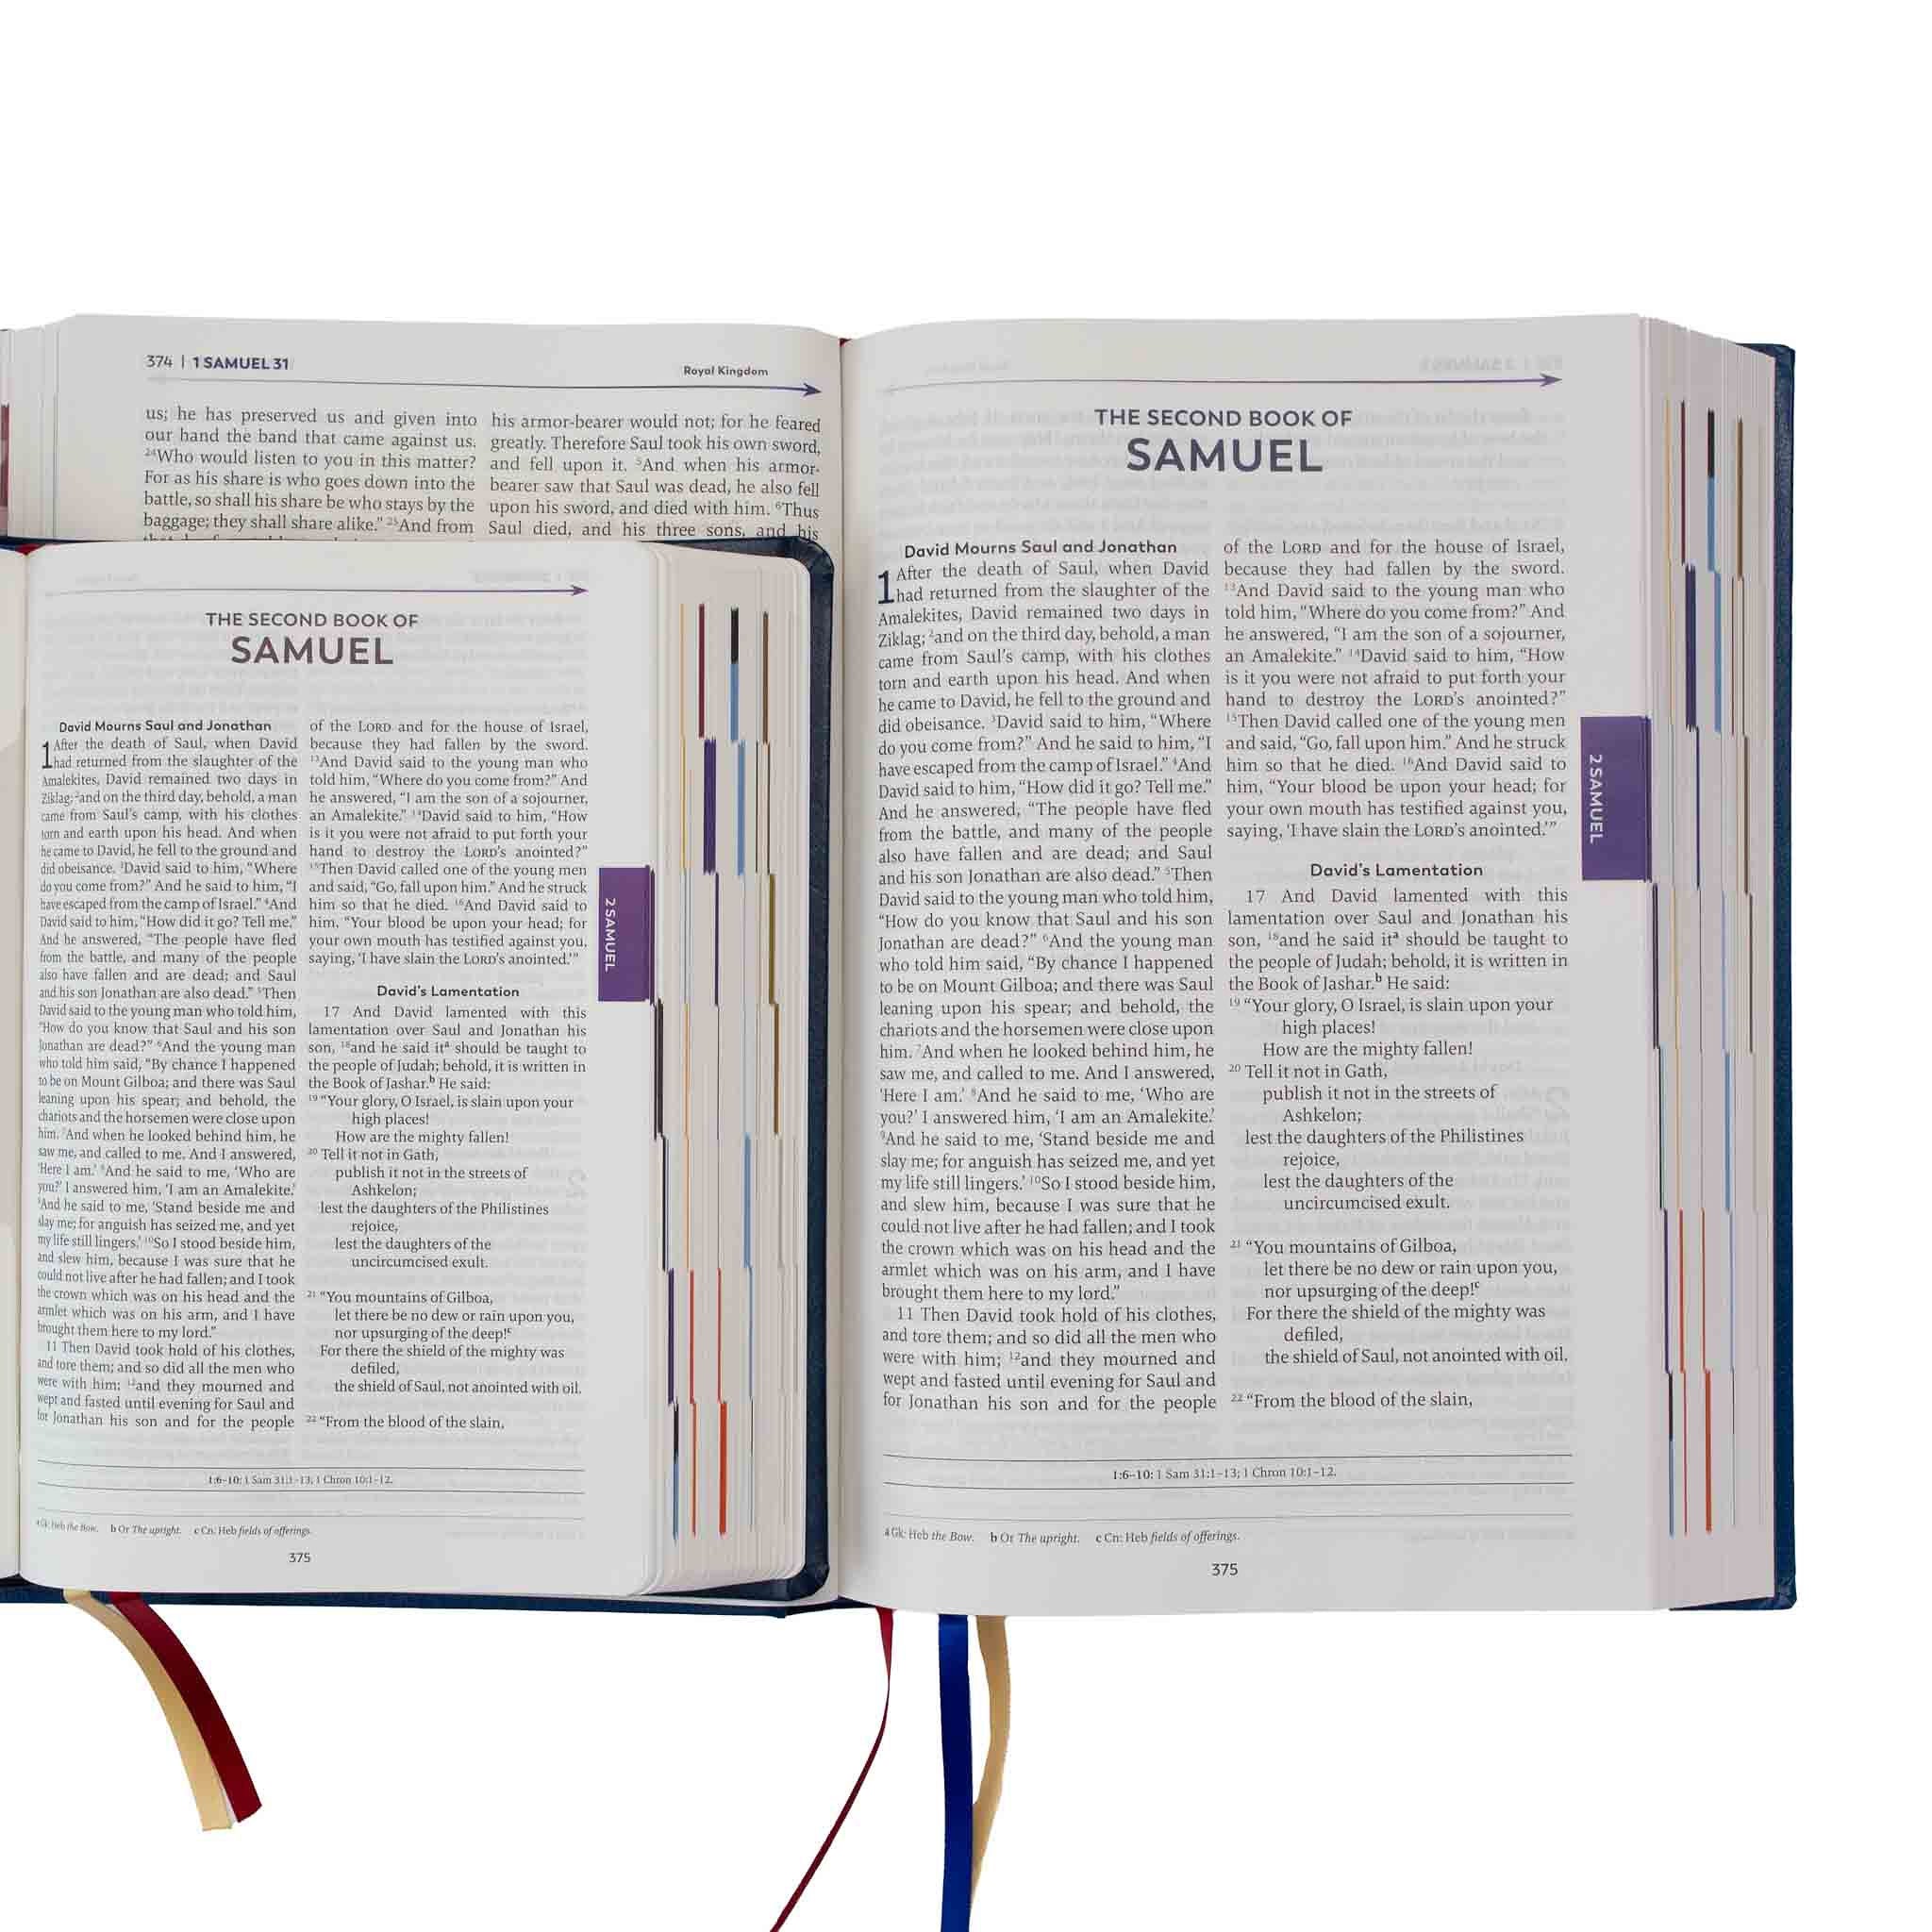 An image that compares the original Great Adventure Catholic Bible size to the Great Adventure Catholic Bible, Large Print Version size.